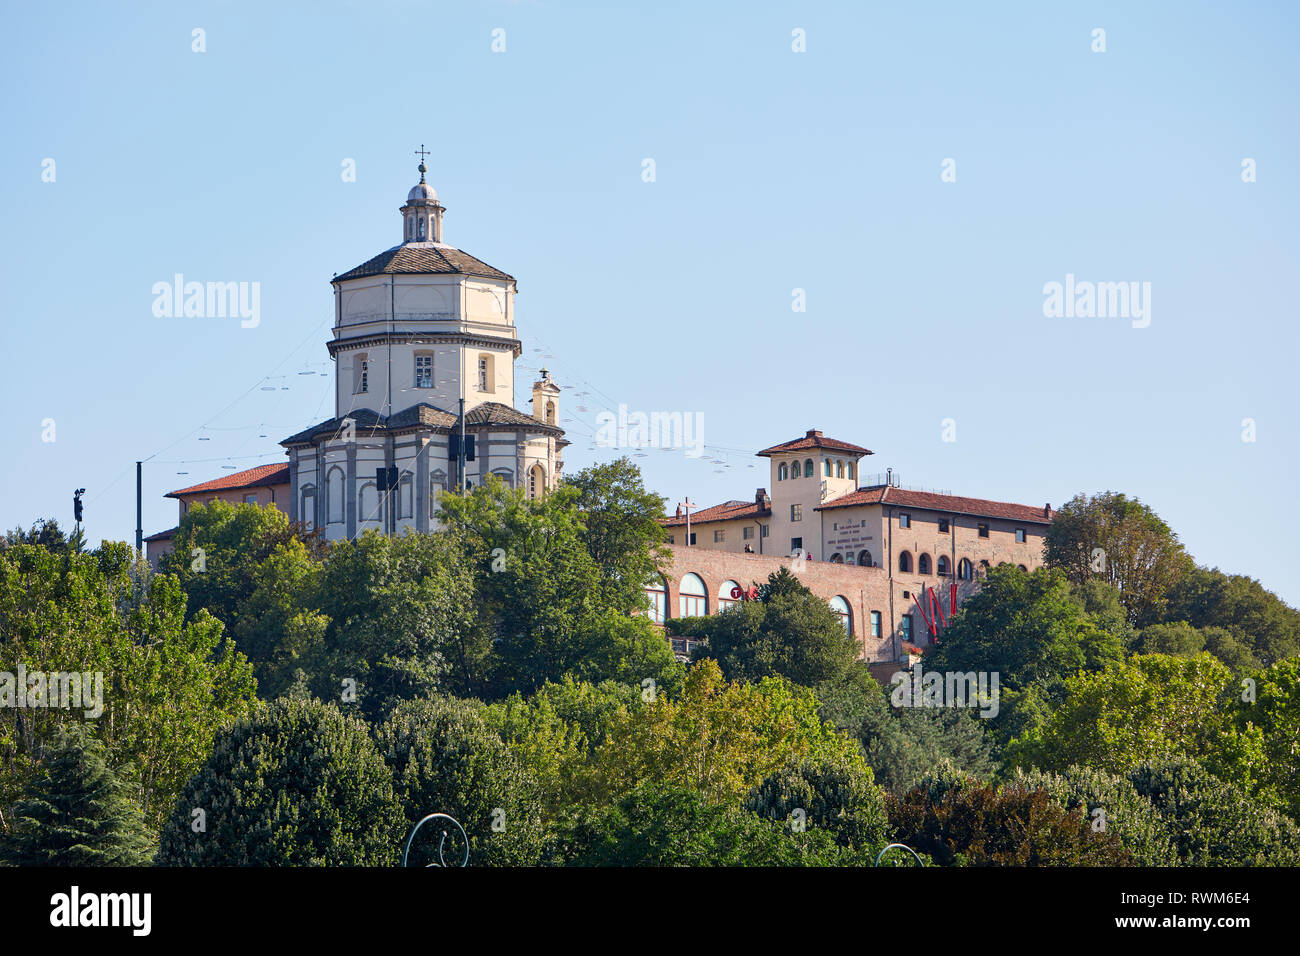 TURIN, ITALY - AUGUST 21, 2017: Cappuccini Mount or mount of Capuchin Monks church and Mountain Museum building in a sunny summer day in Turin, Italy Stock Photo